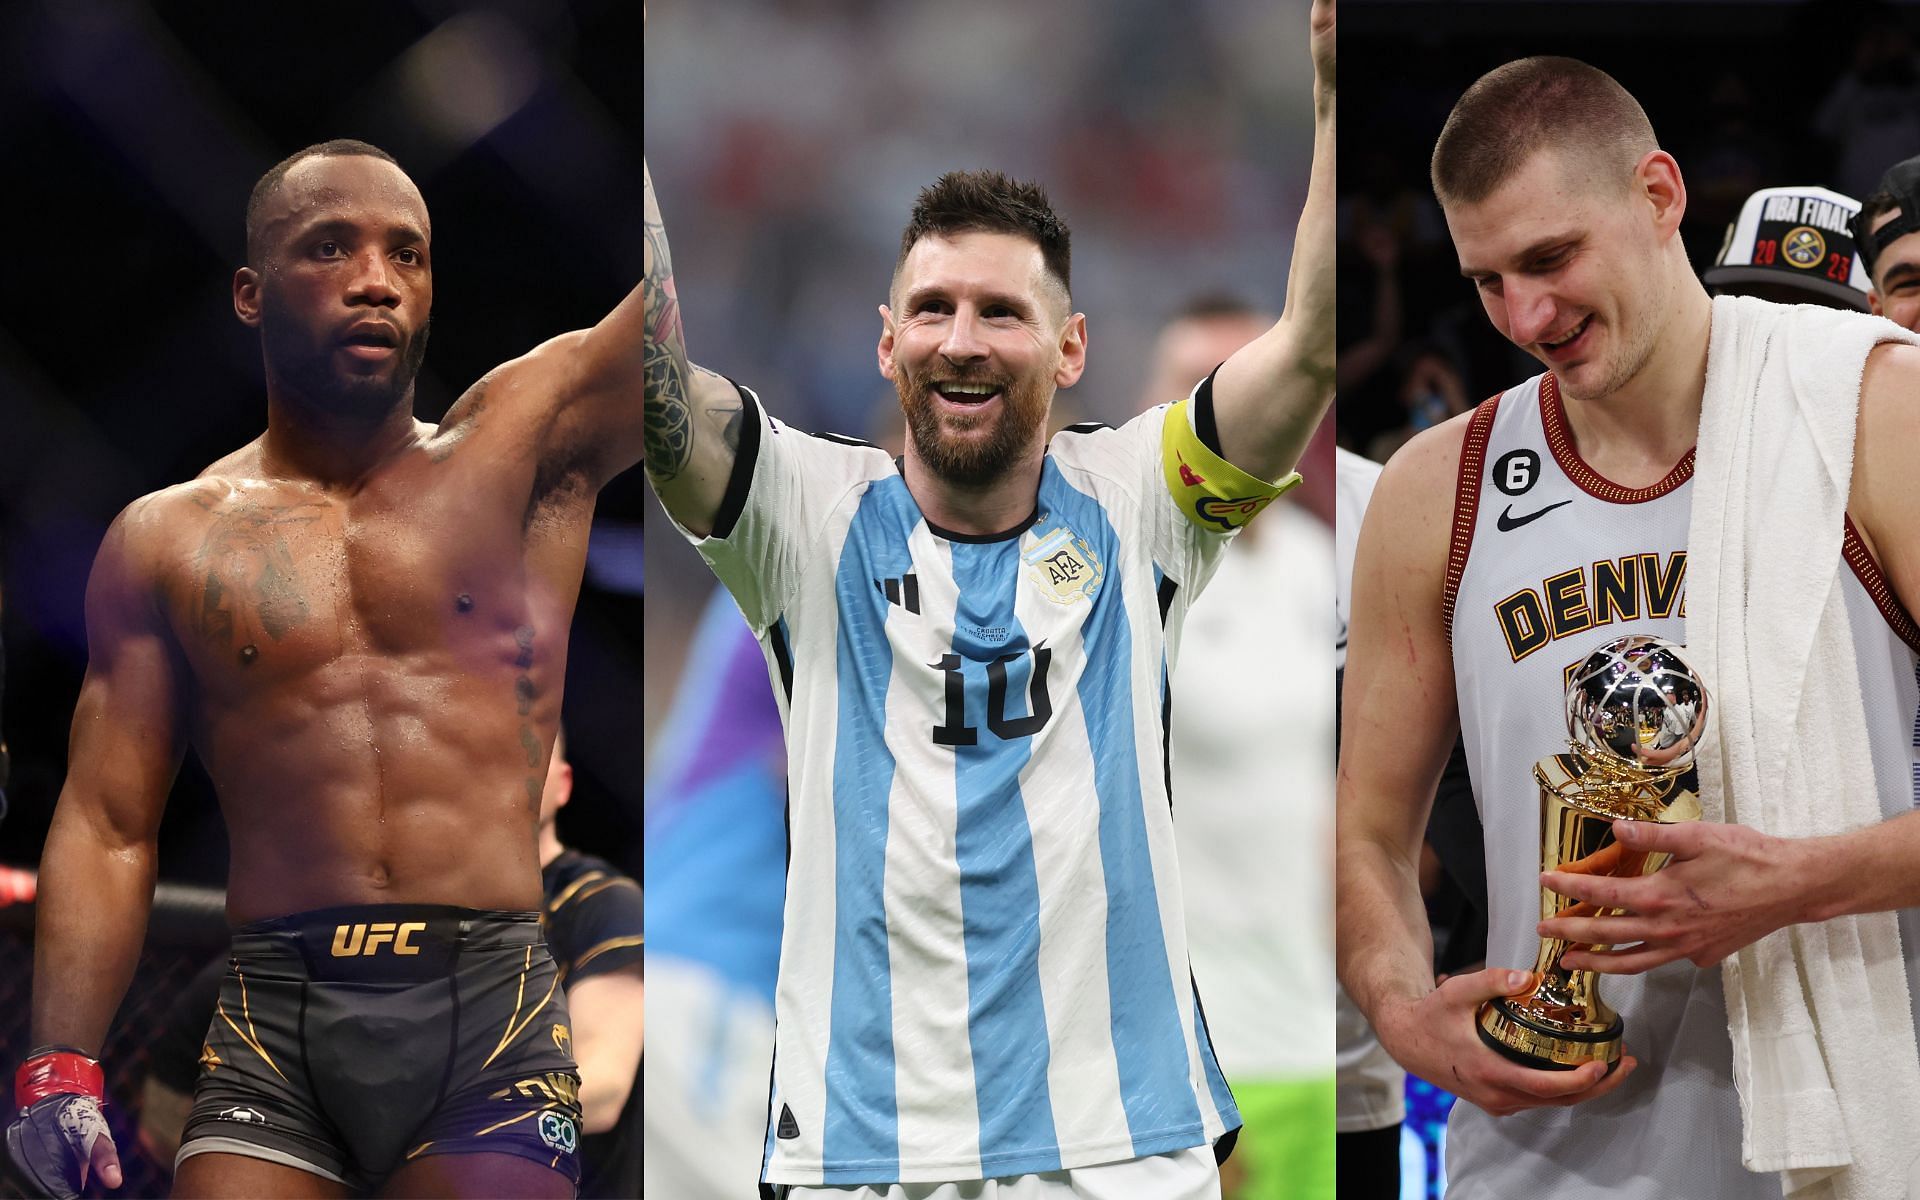 Leon Edwards (left), Lionel Messi (center), and Nikola Jokic (right) (Image credits Getty Images)